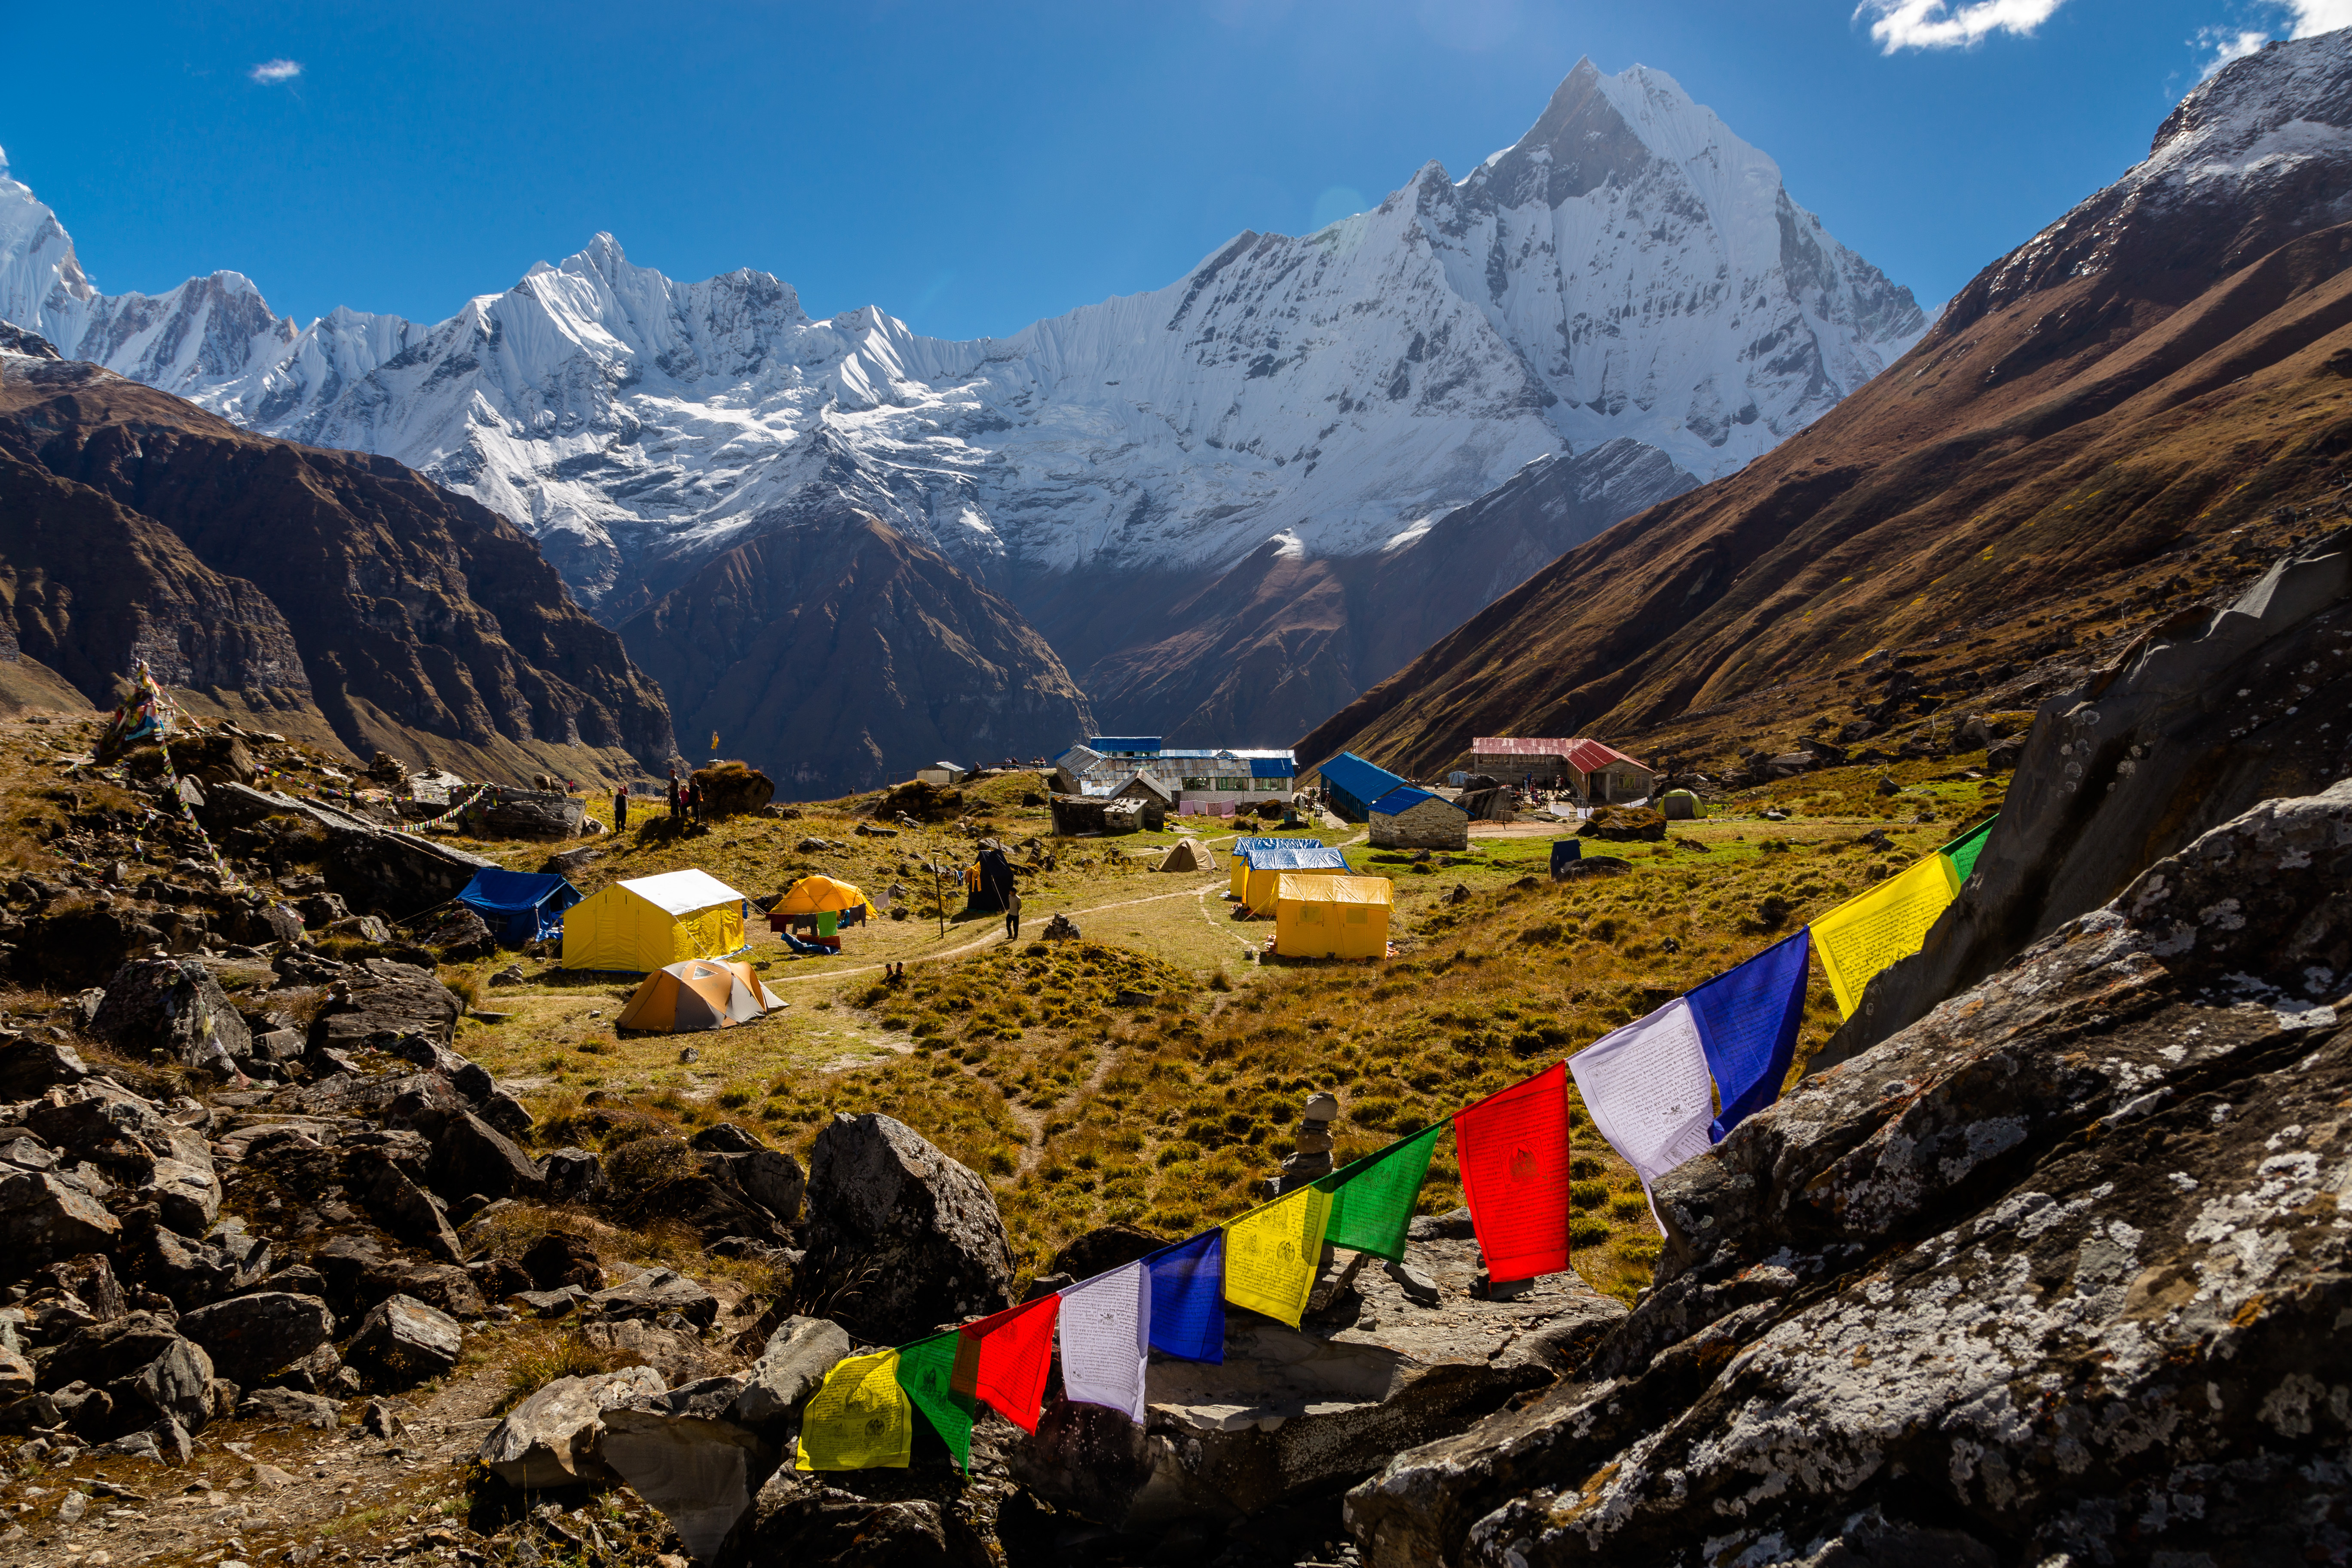 Annapurna Base Camp, in Nepal, with prayer flags in the foreground and the Himalayan mountains in the background